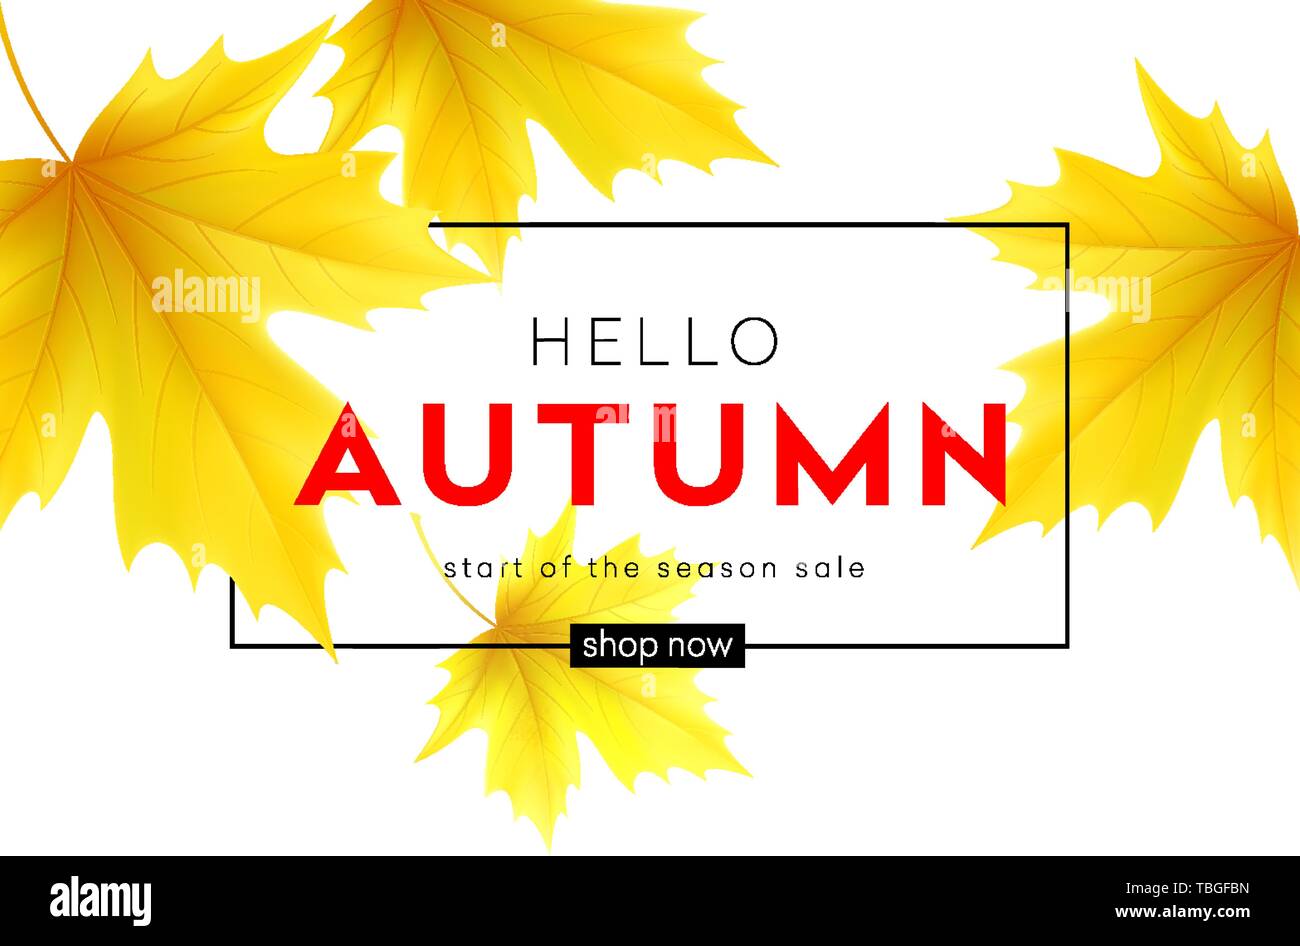 Autumn poster with lettering and yellow autumn maple leaves. Vector illustration Stock Vector